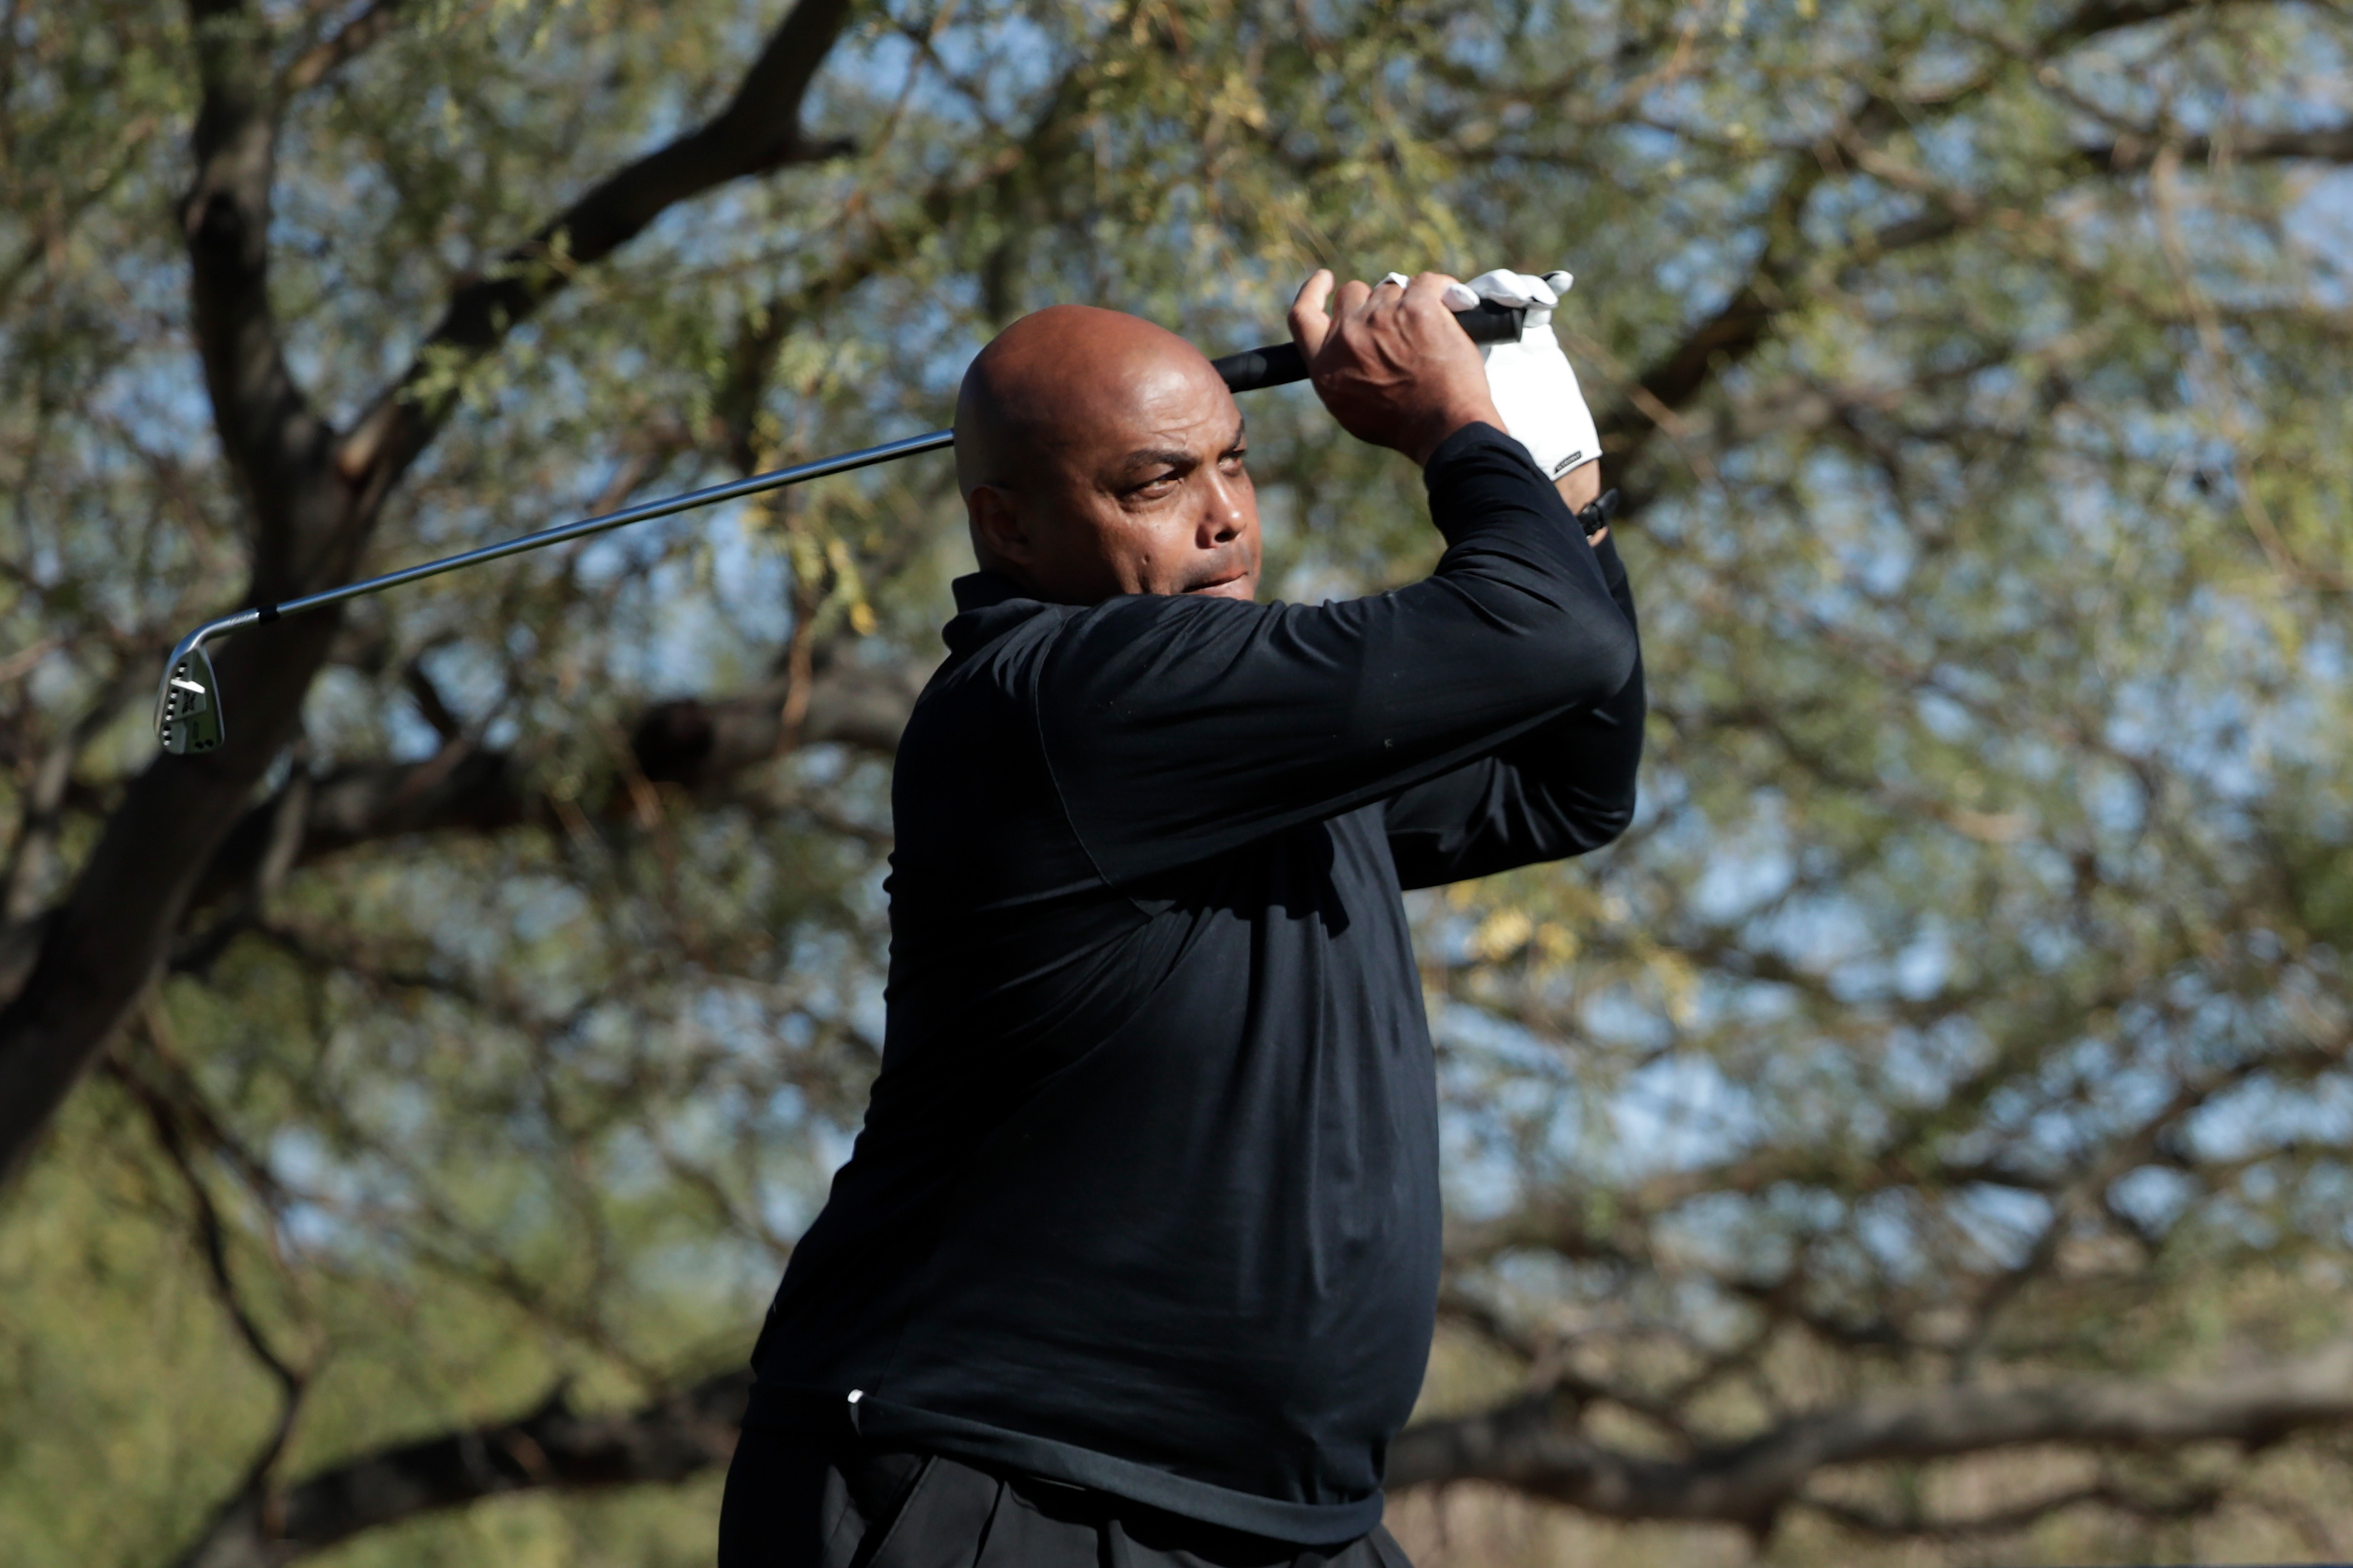 Charles Barkley plays his shot from the first tee